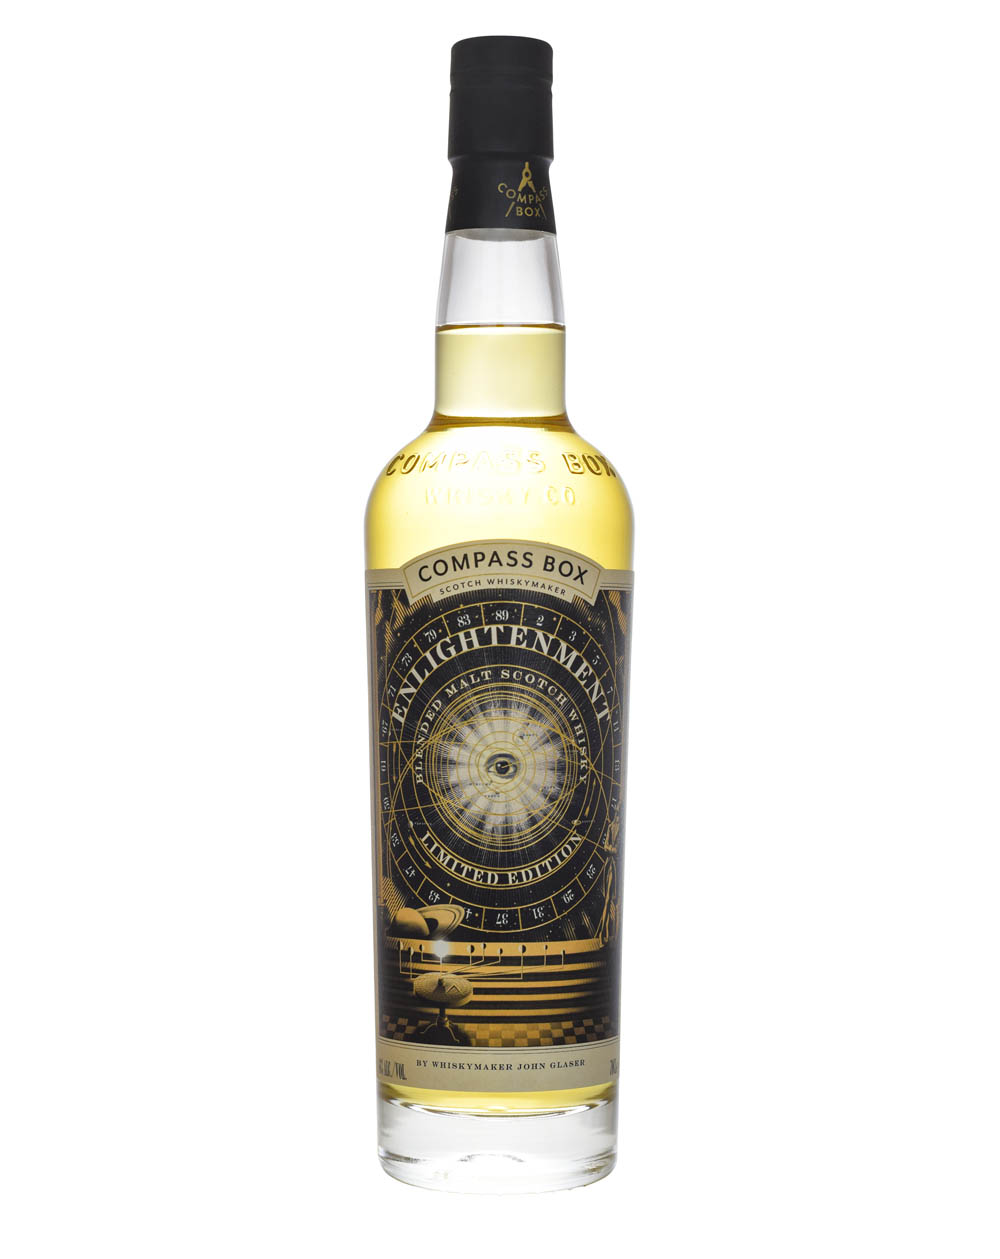 Compass Box Enlightment Musthave Malts MHM